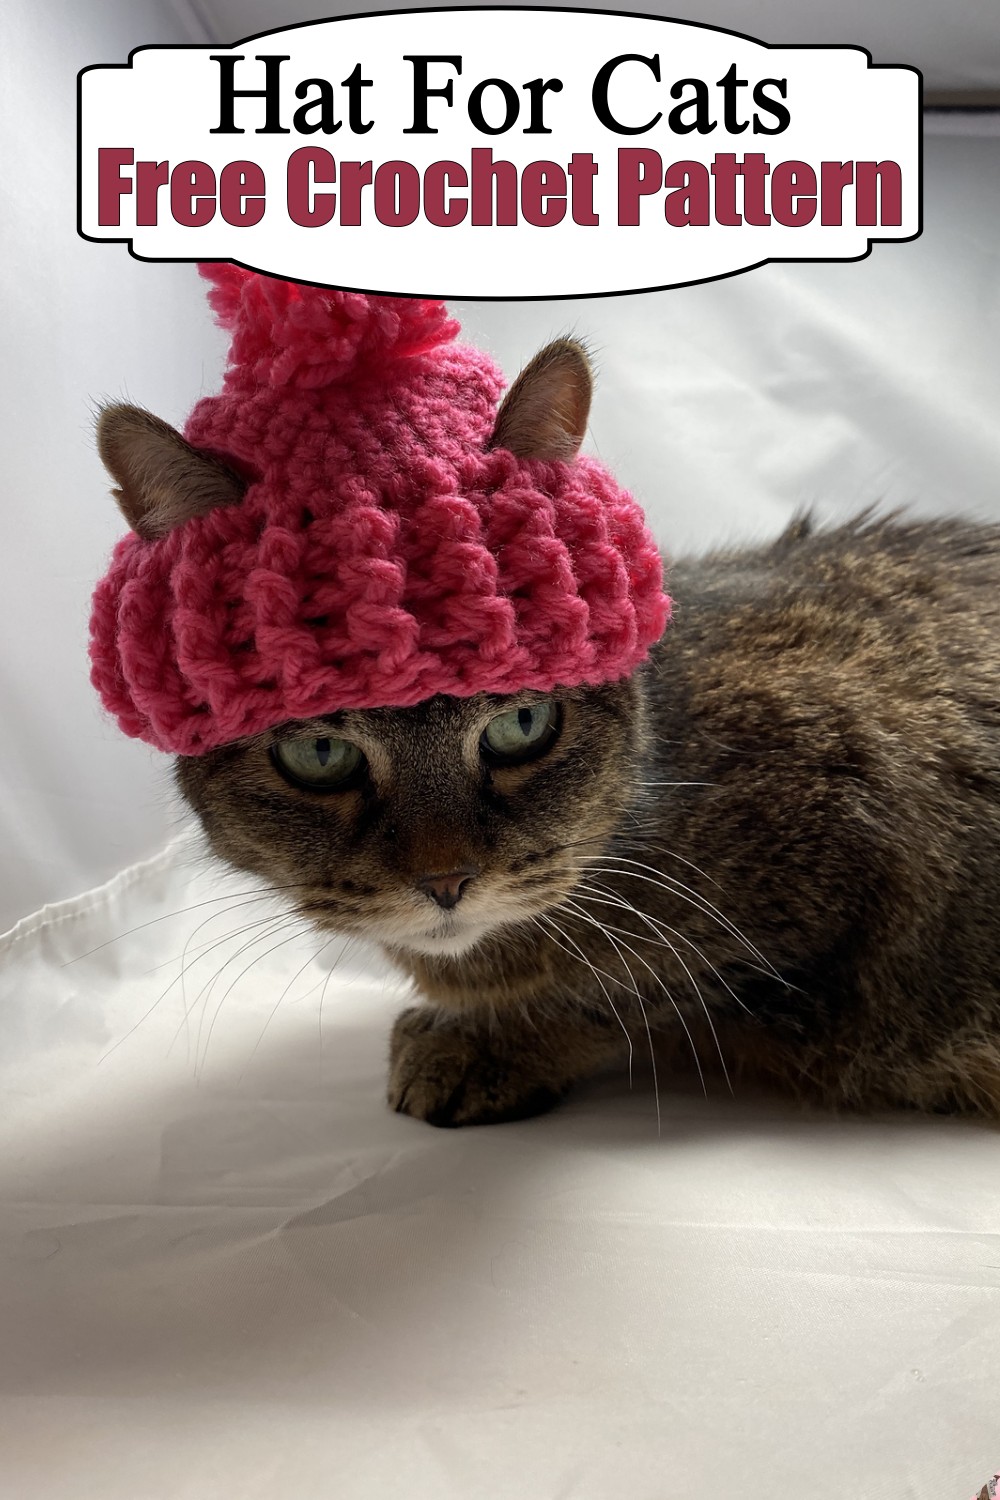 Hat For Cats